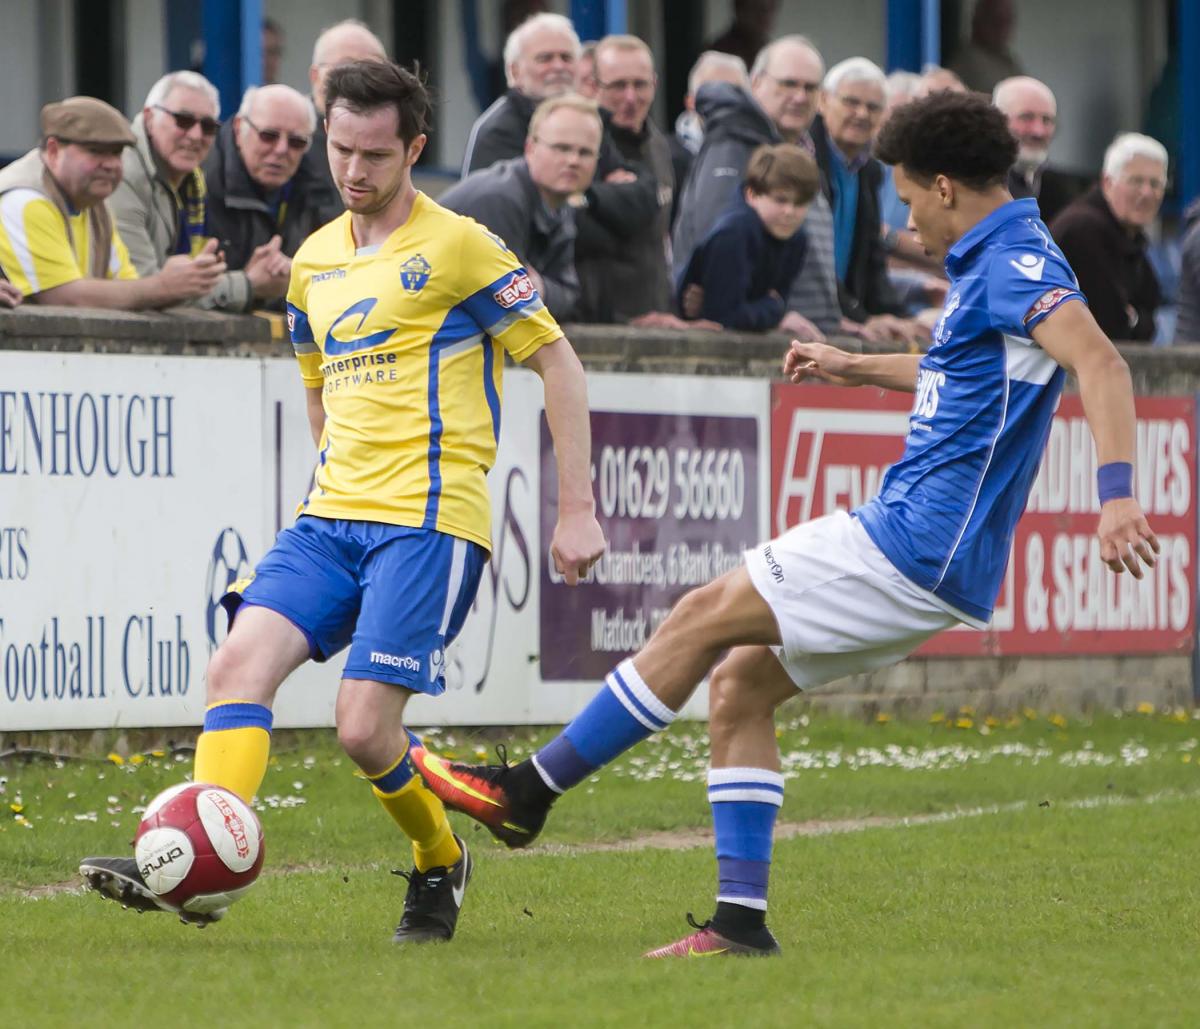 Action from Yellows' final game of the 2016/17 season at Matlock. Pictures by John Hopkins